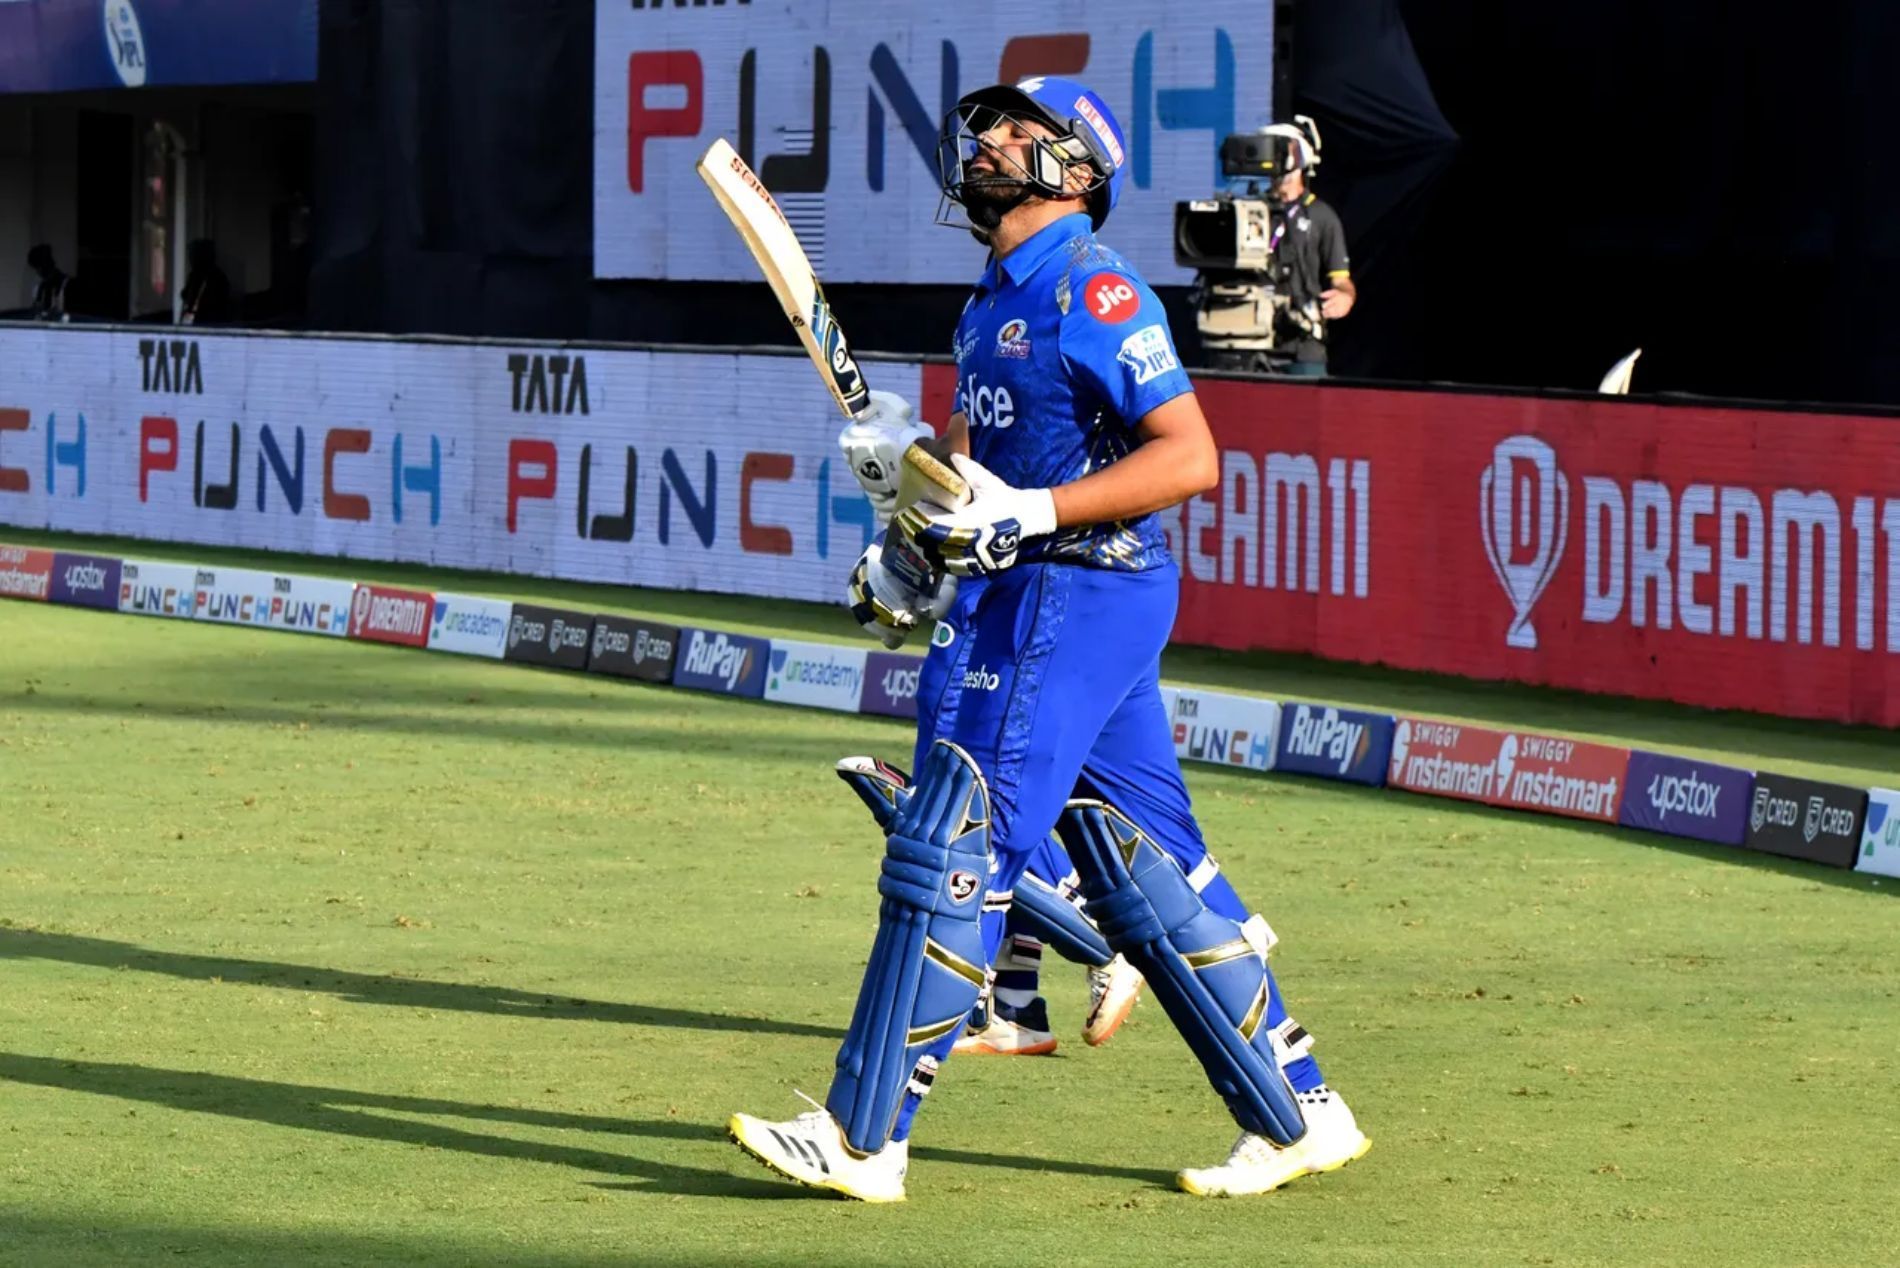 Rohit Sharma has had a forgettable IPL 2022 with the bat. Pic: IPLT20.COM